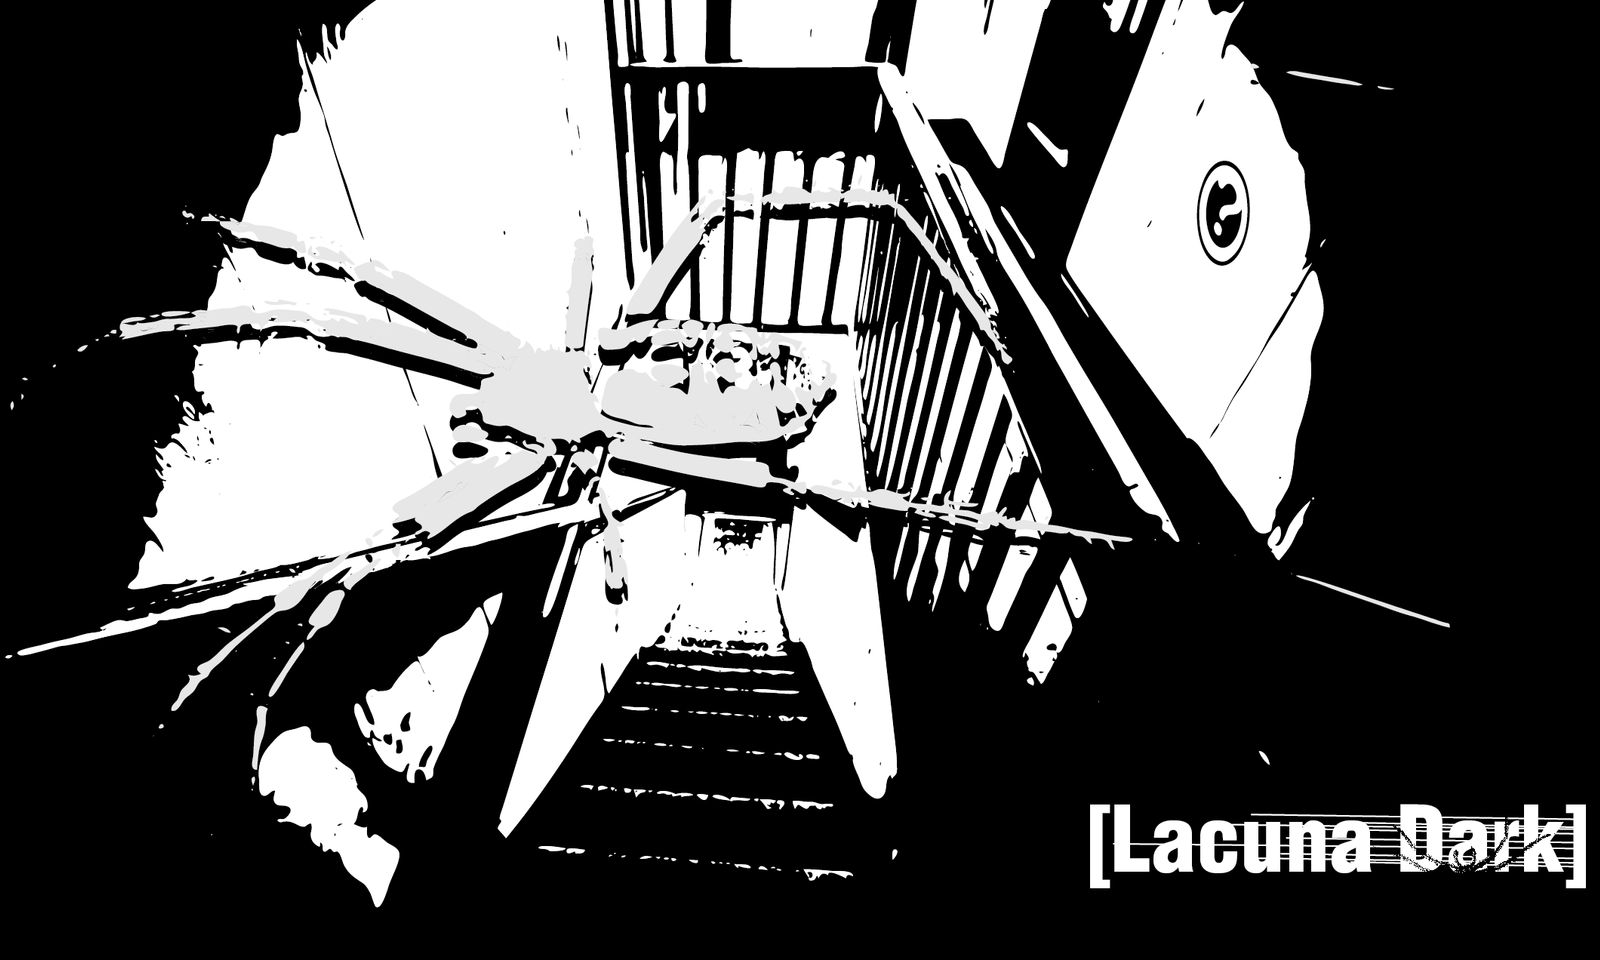 Stark black and white image of a stairwell with a giant spider crawling across